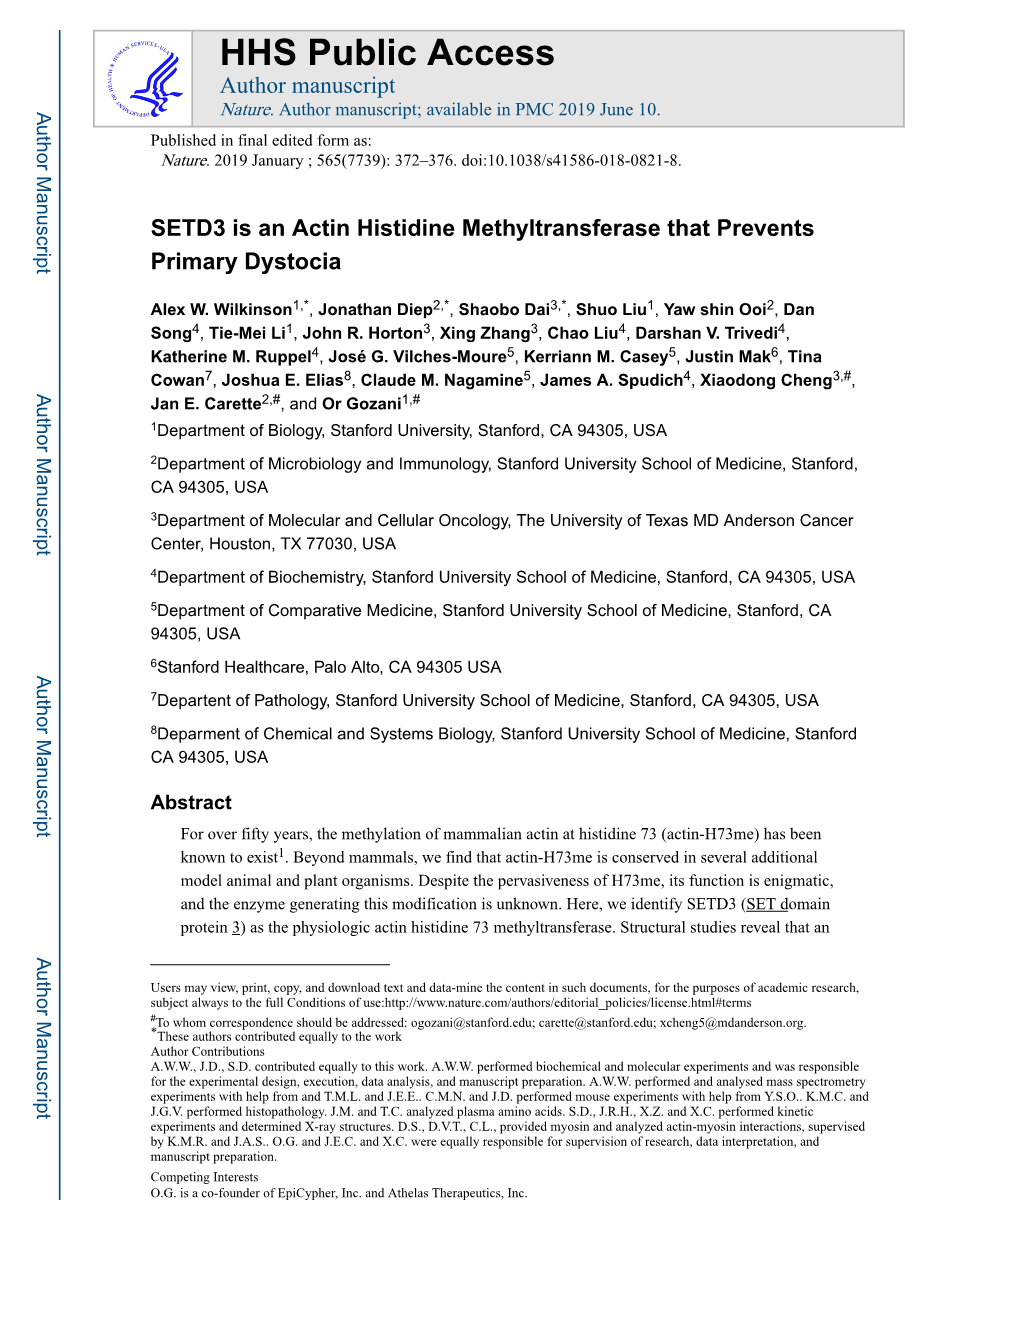 SETD3 Is an Actin Histidine Methyltransferase That Prevents Primary Dystocia